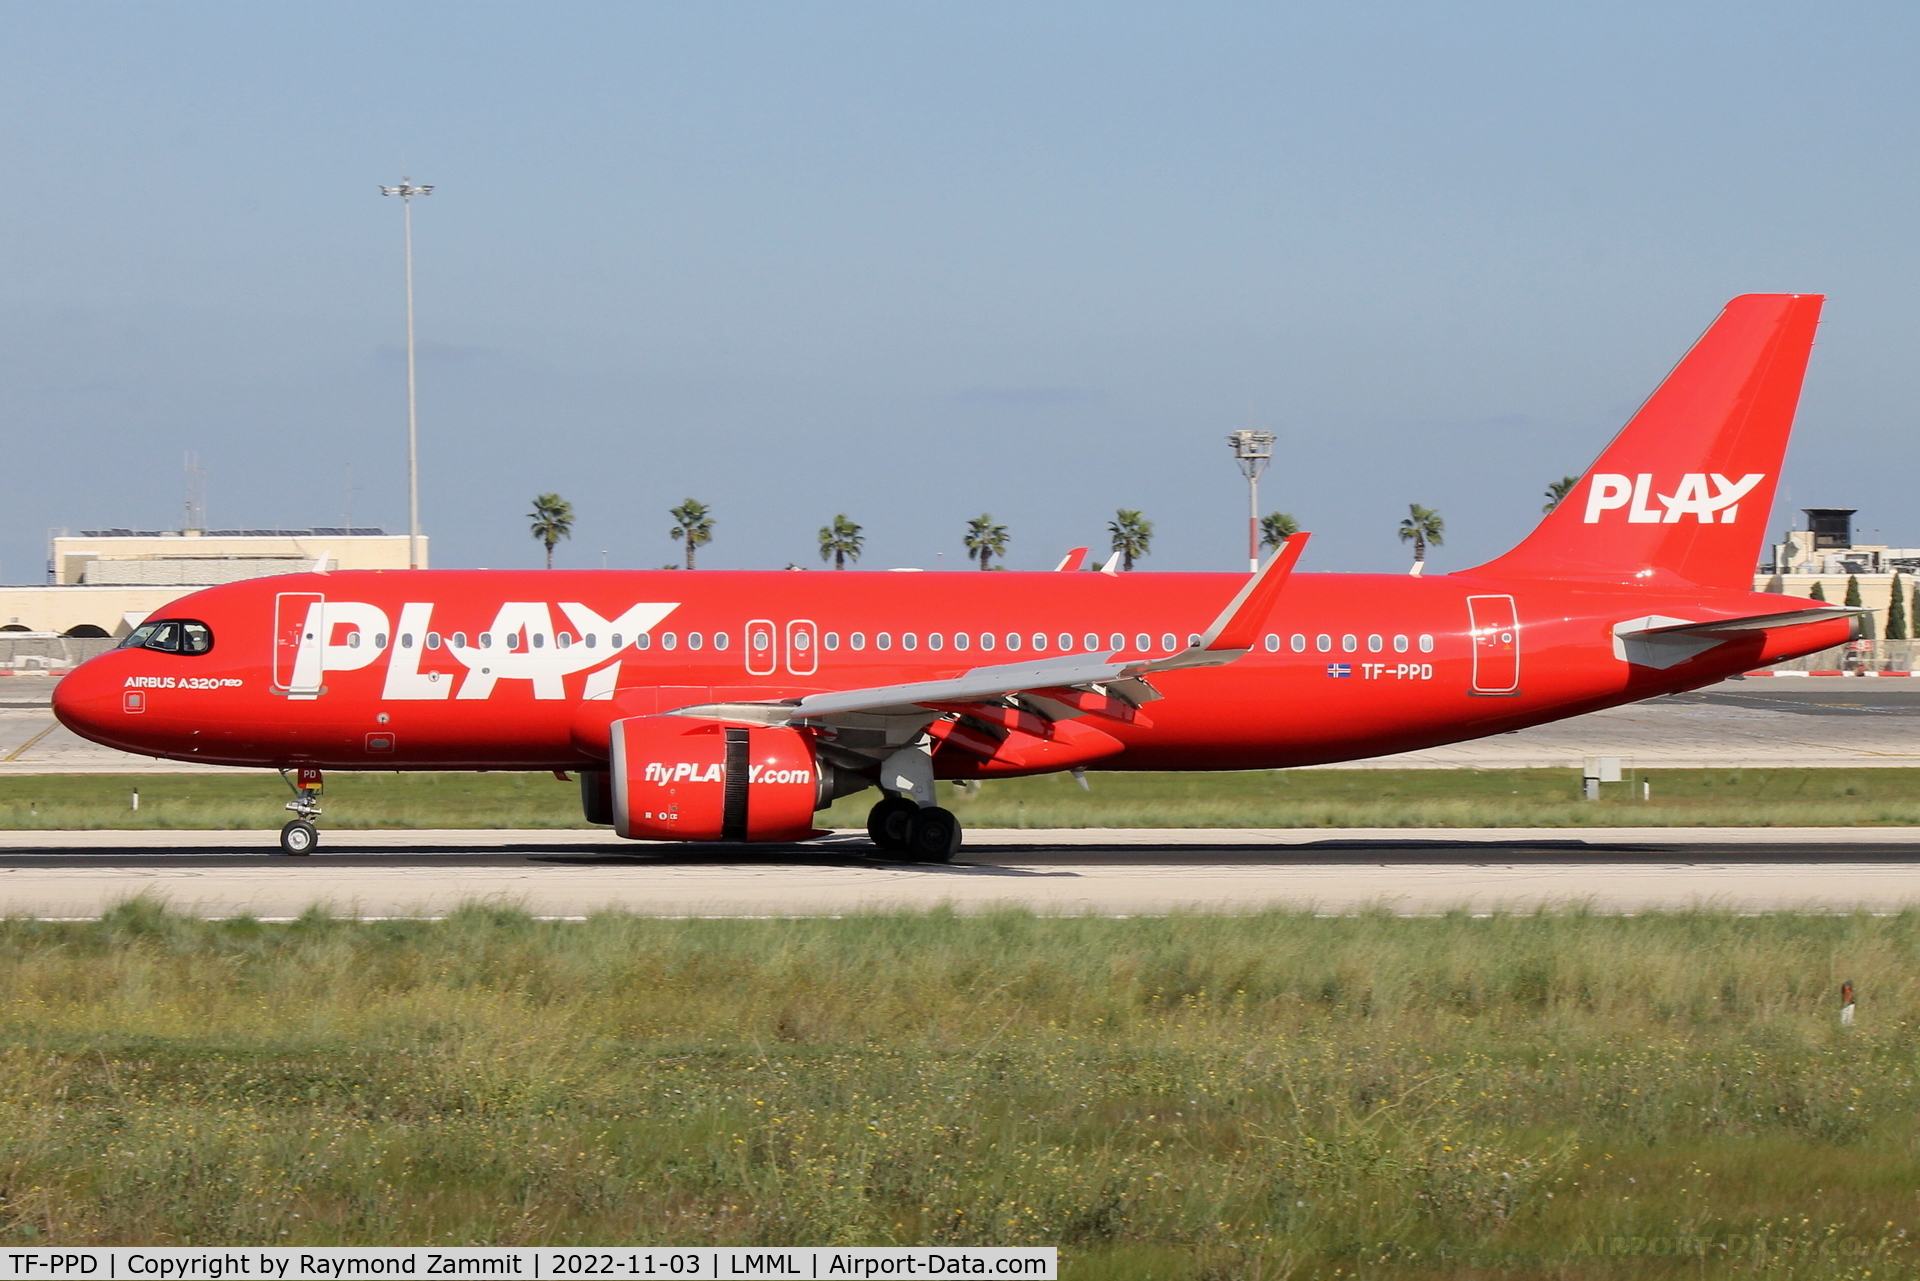 TF-PPD, 2017 Airbus A320-251N C/N 7576, A320 TF-PPD Play Airlines